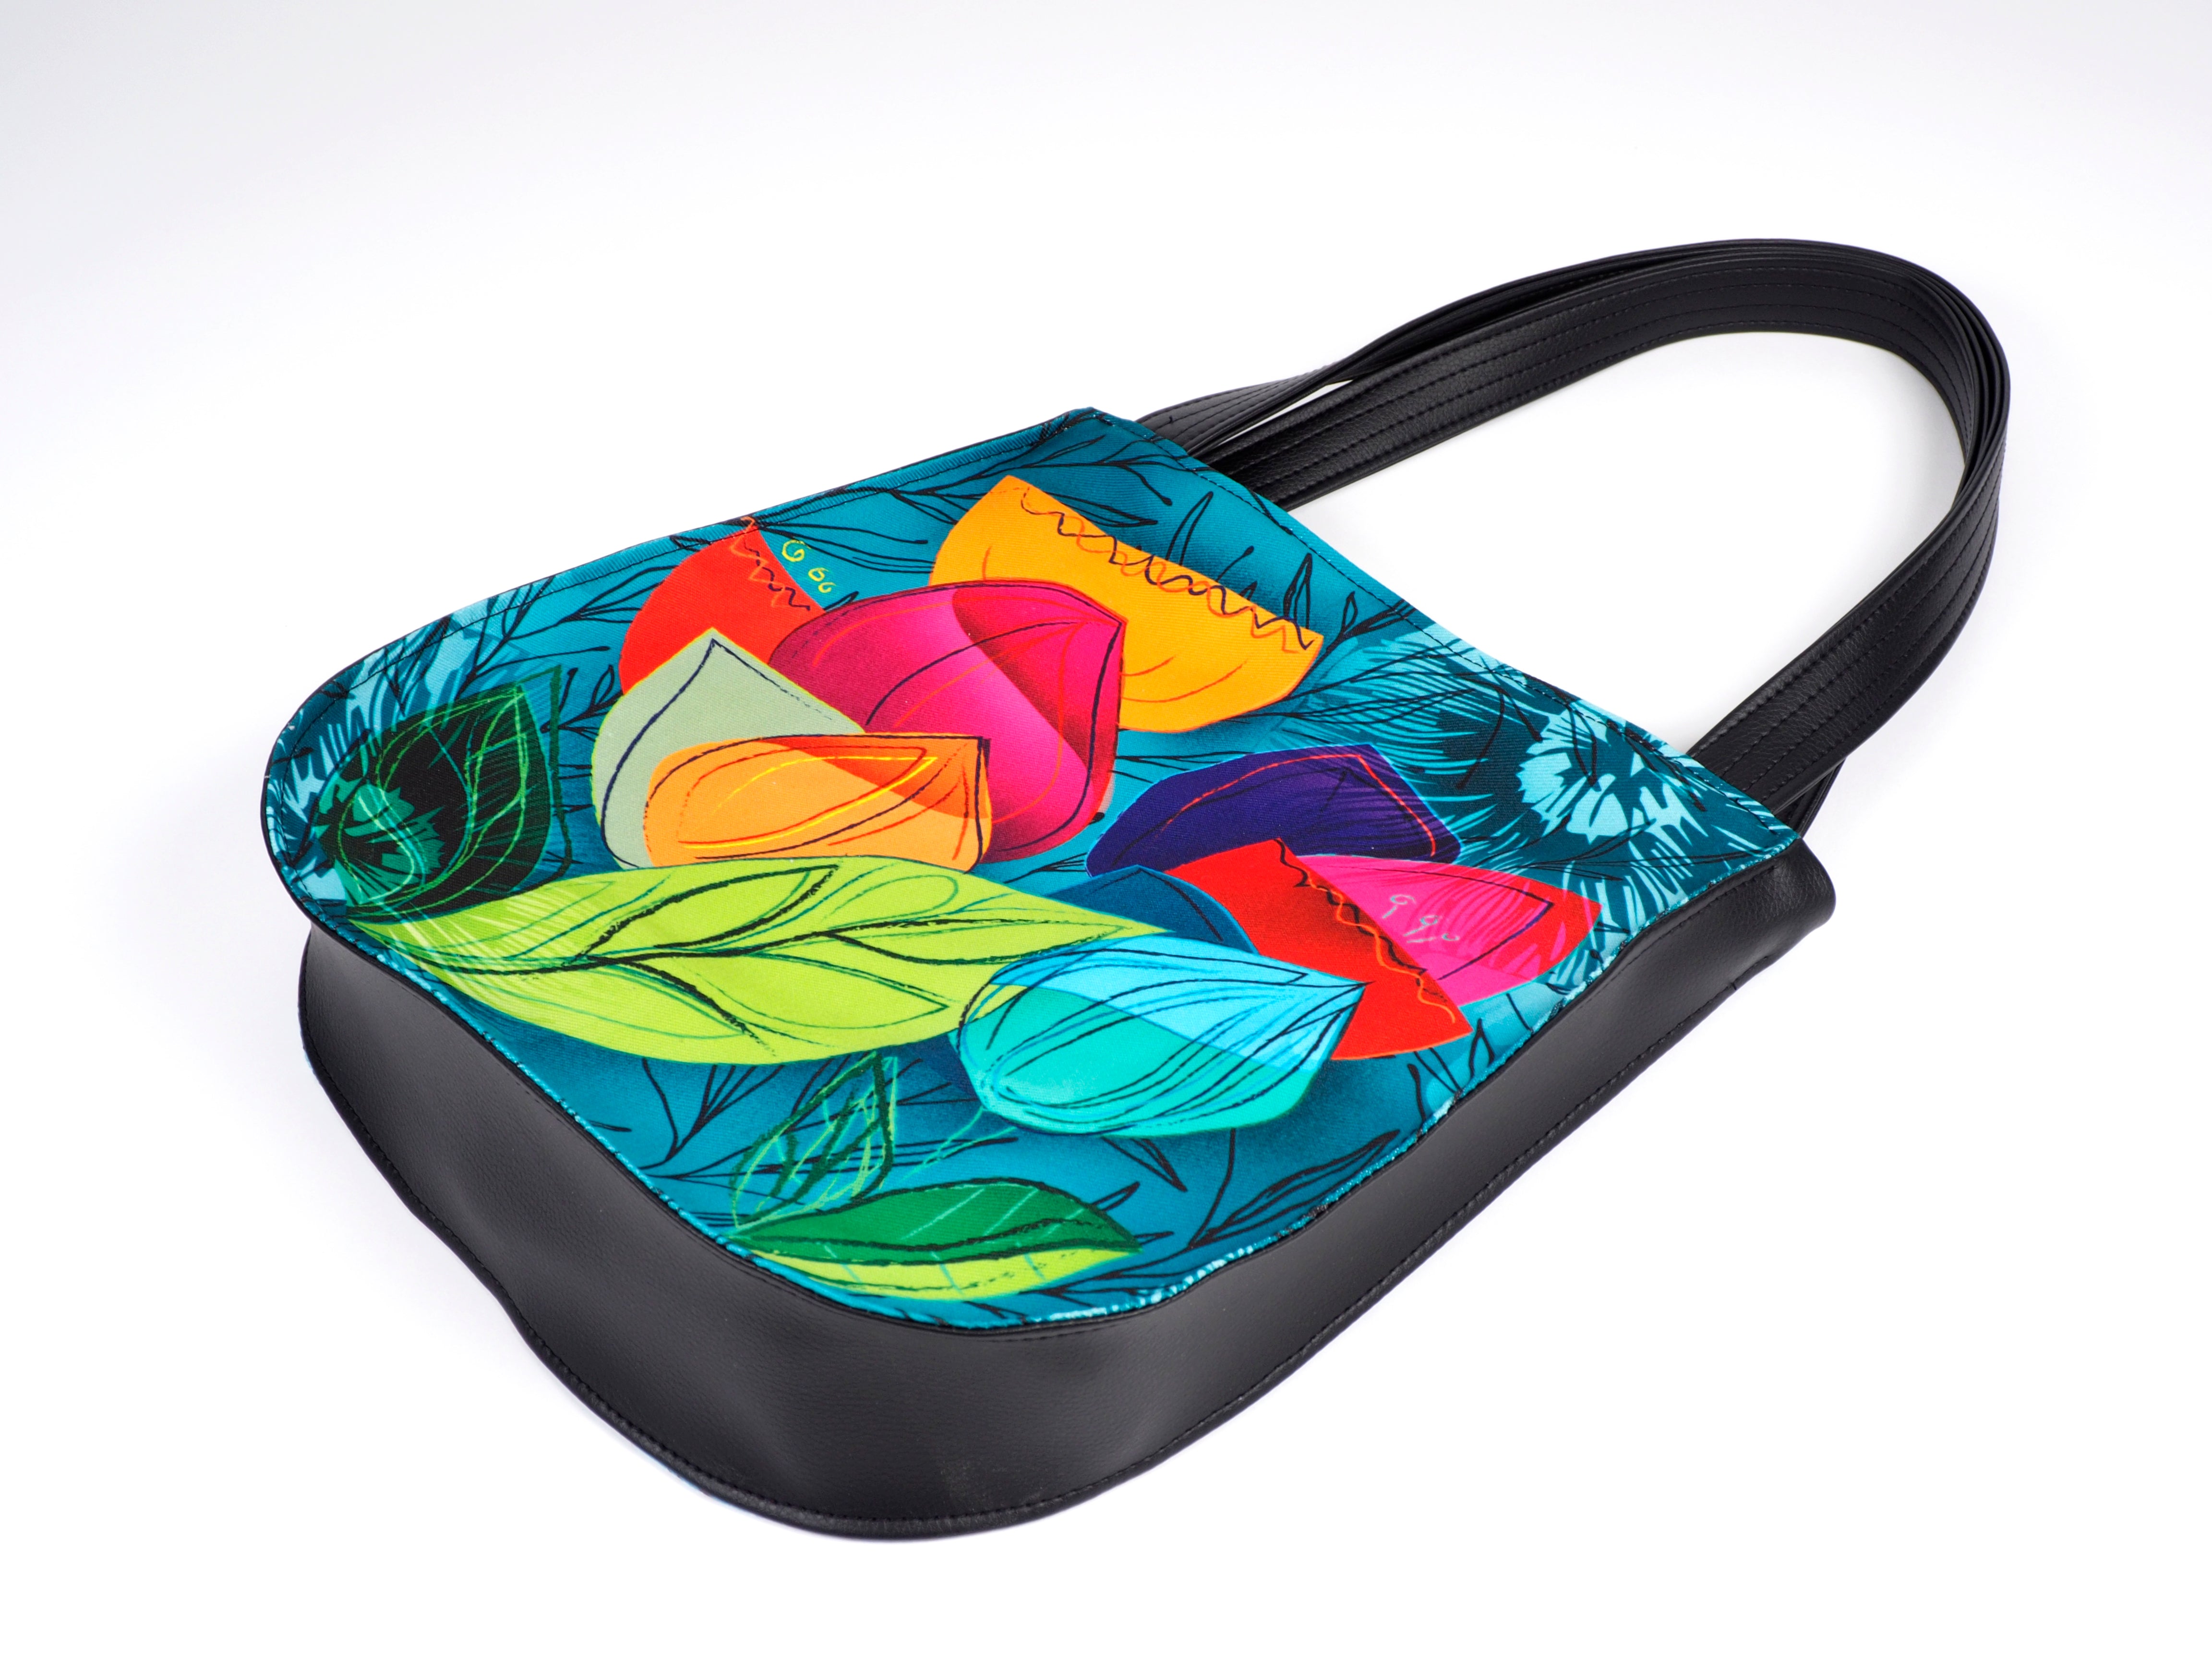 Bardo style bag - Forest flowers - Premium style bag from BARDO ART WORKS - Just lvbeige, dark blue, flowers, forest flowers, green, leaves, pink, red, summer, yellow69.00! Shop now at BARDO ART WORKS